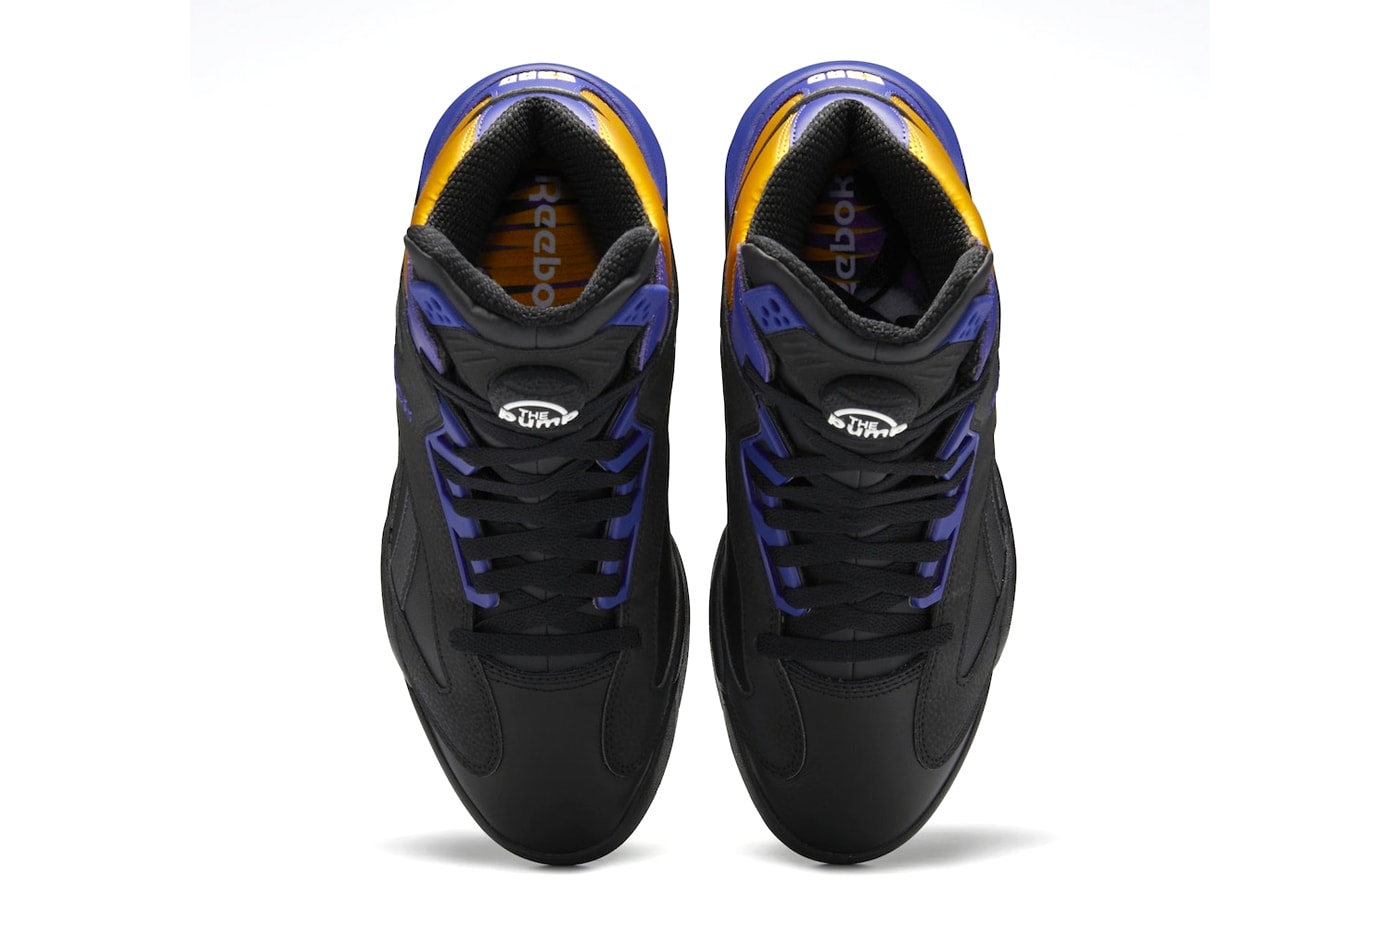 Reebok Shaq Attaq Lakers Release Info GY7127 Date Buy Price Core Black Bold Purple Collegiate Gold Los Angeles Shaquille O'Neal